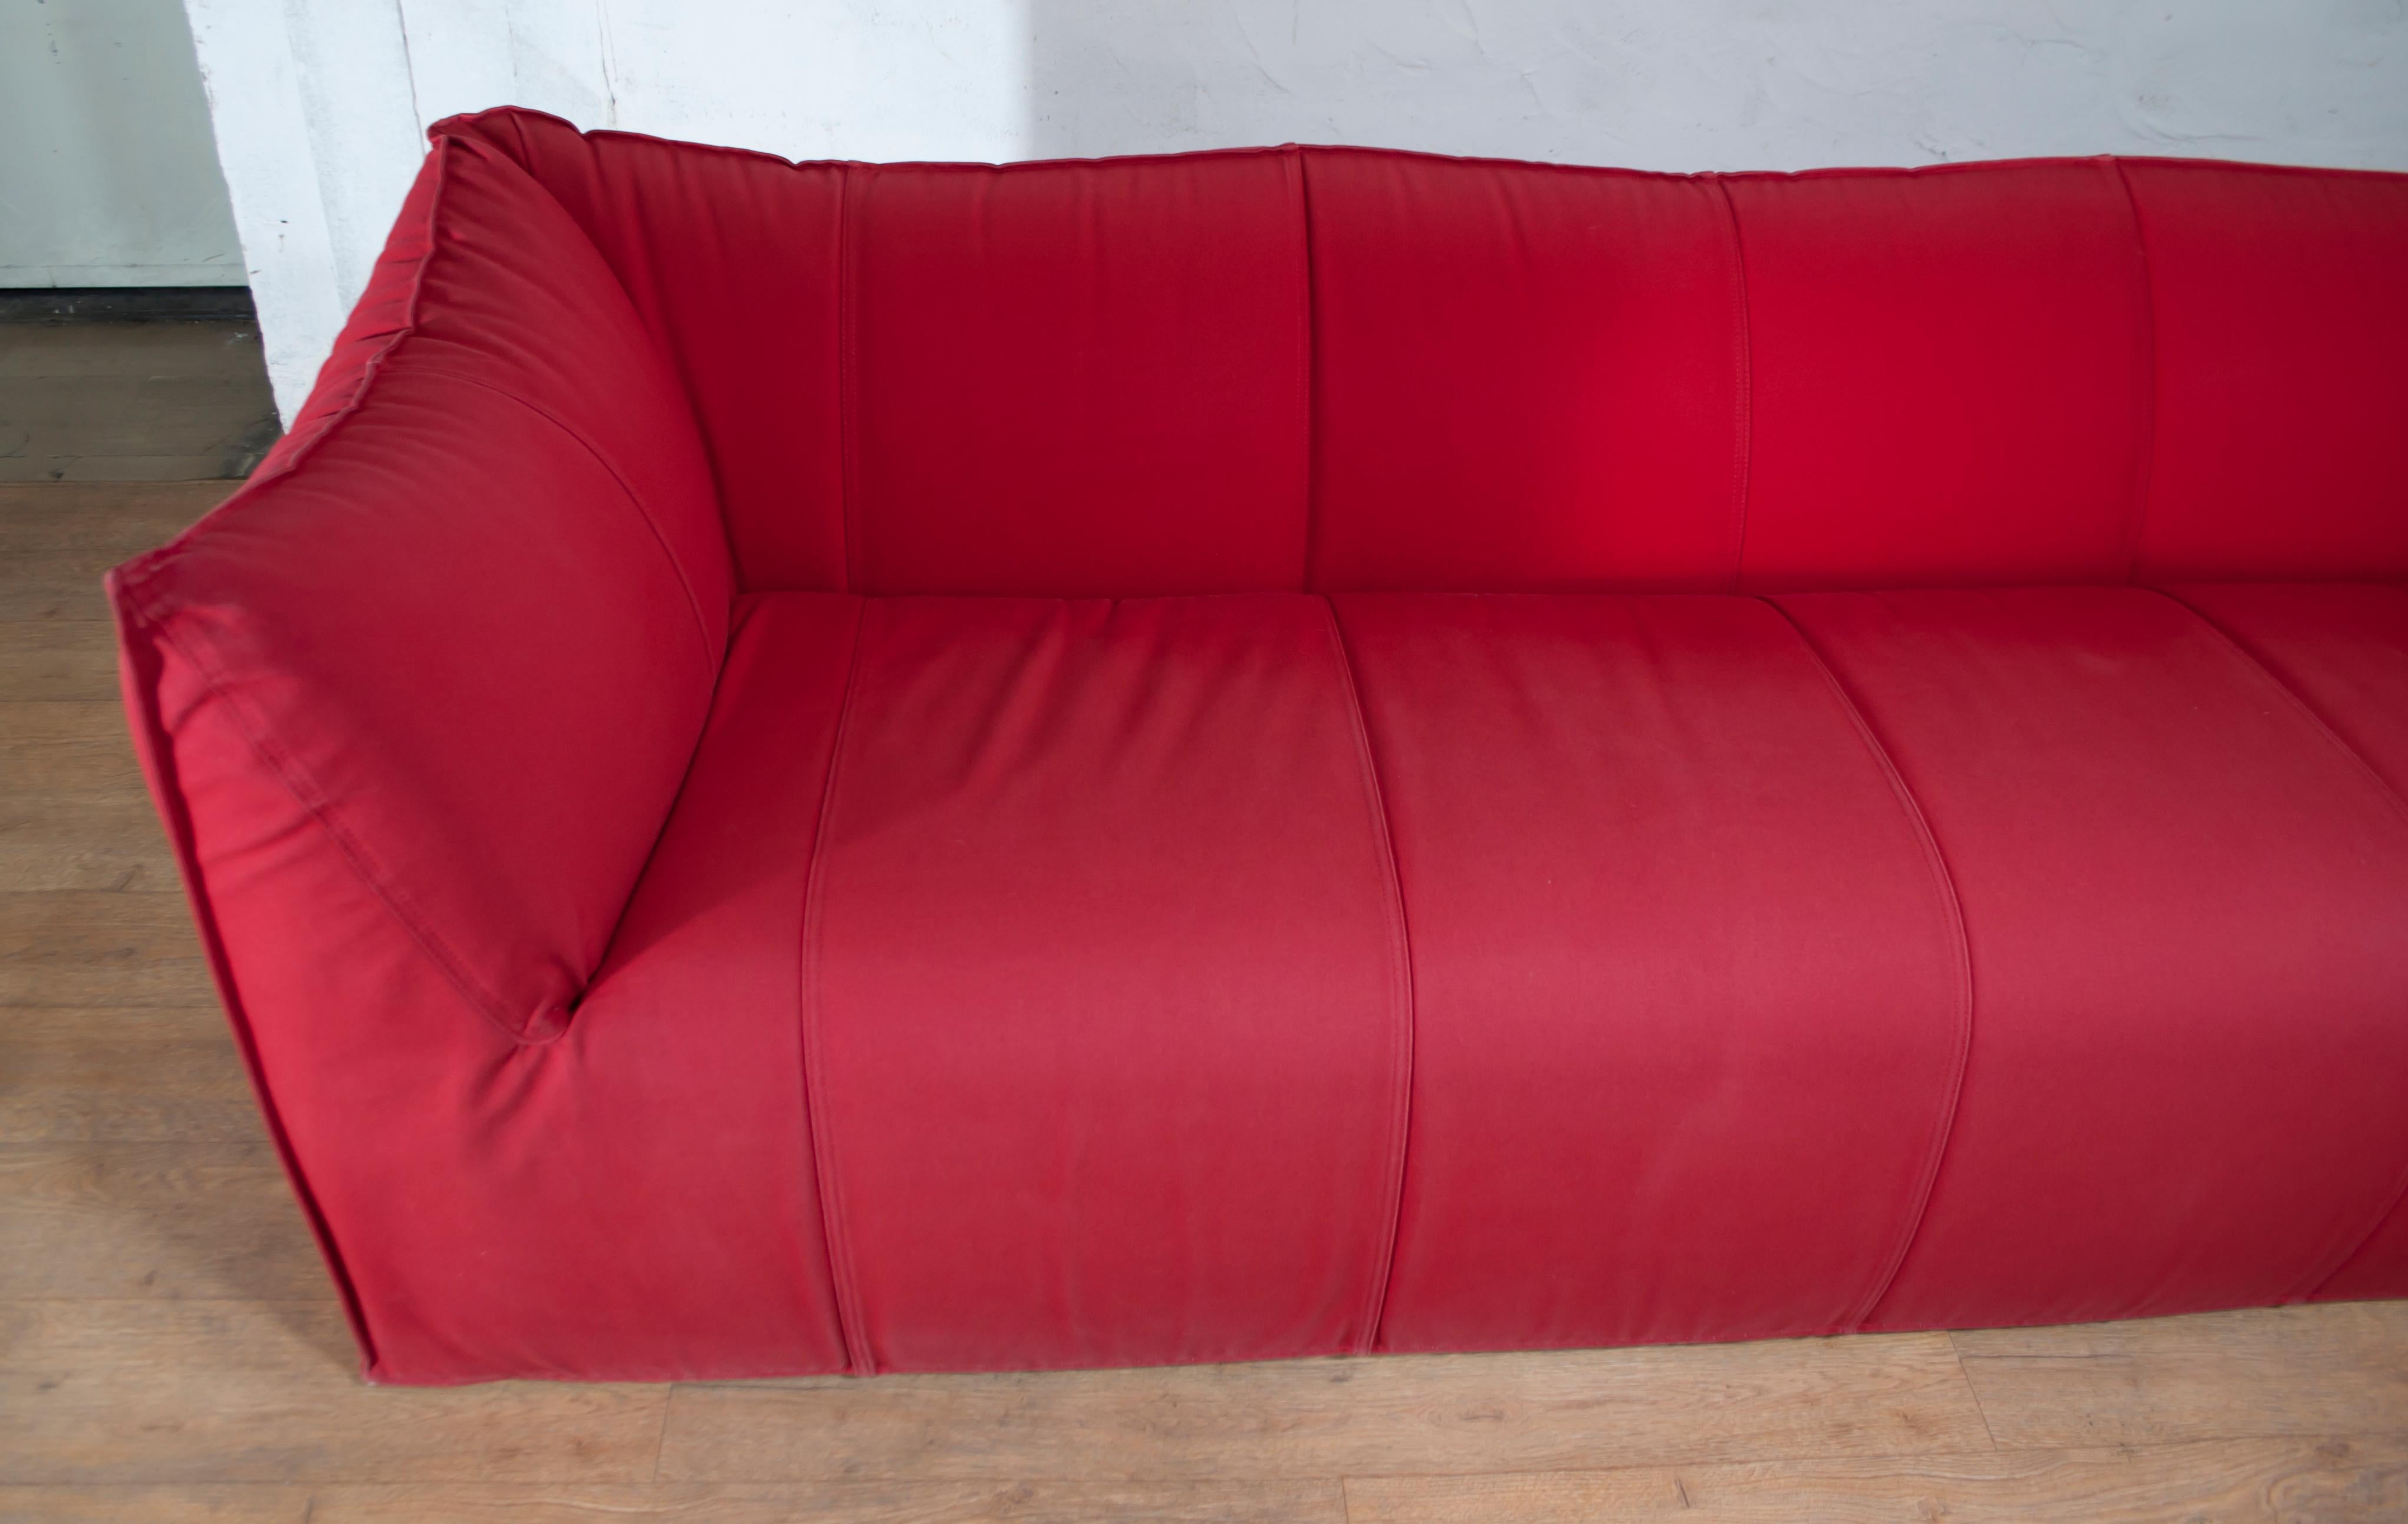 Mid-Century Modern Mario Bellini Sofa and Pouf Tribambola Red Canvas Lining 